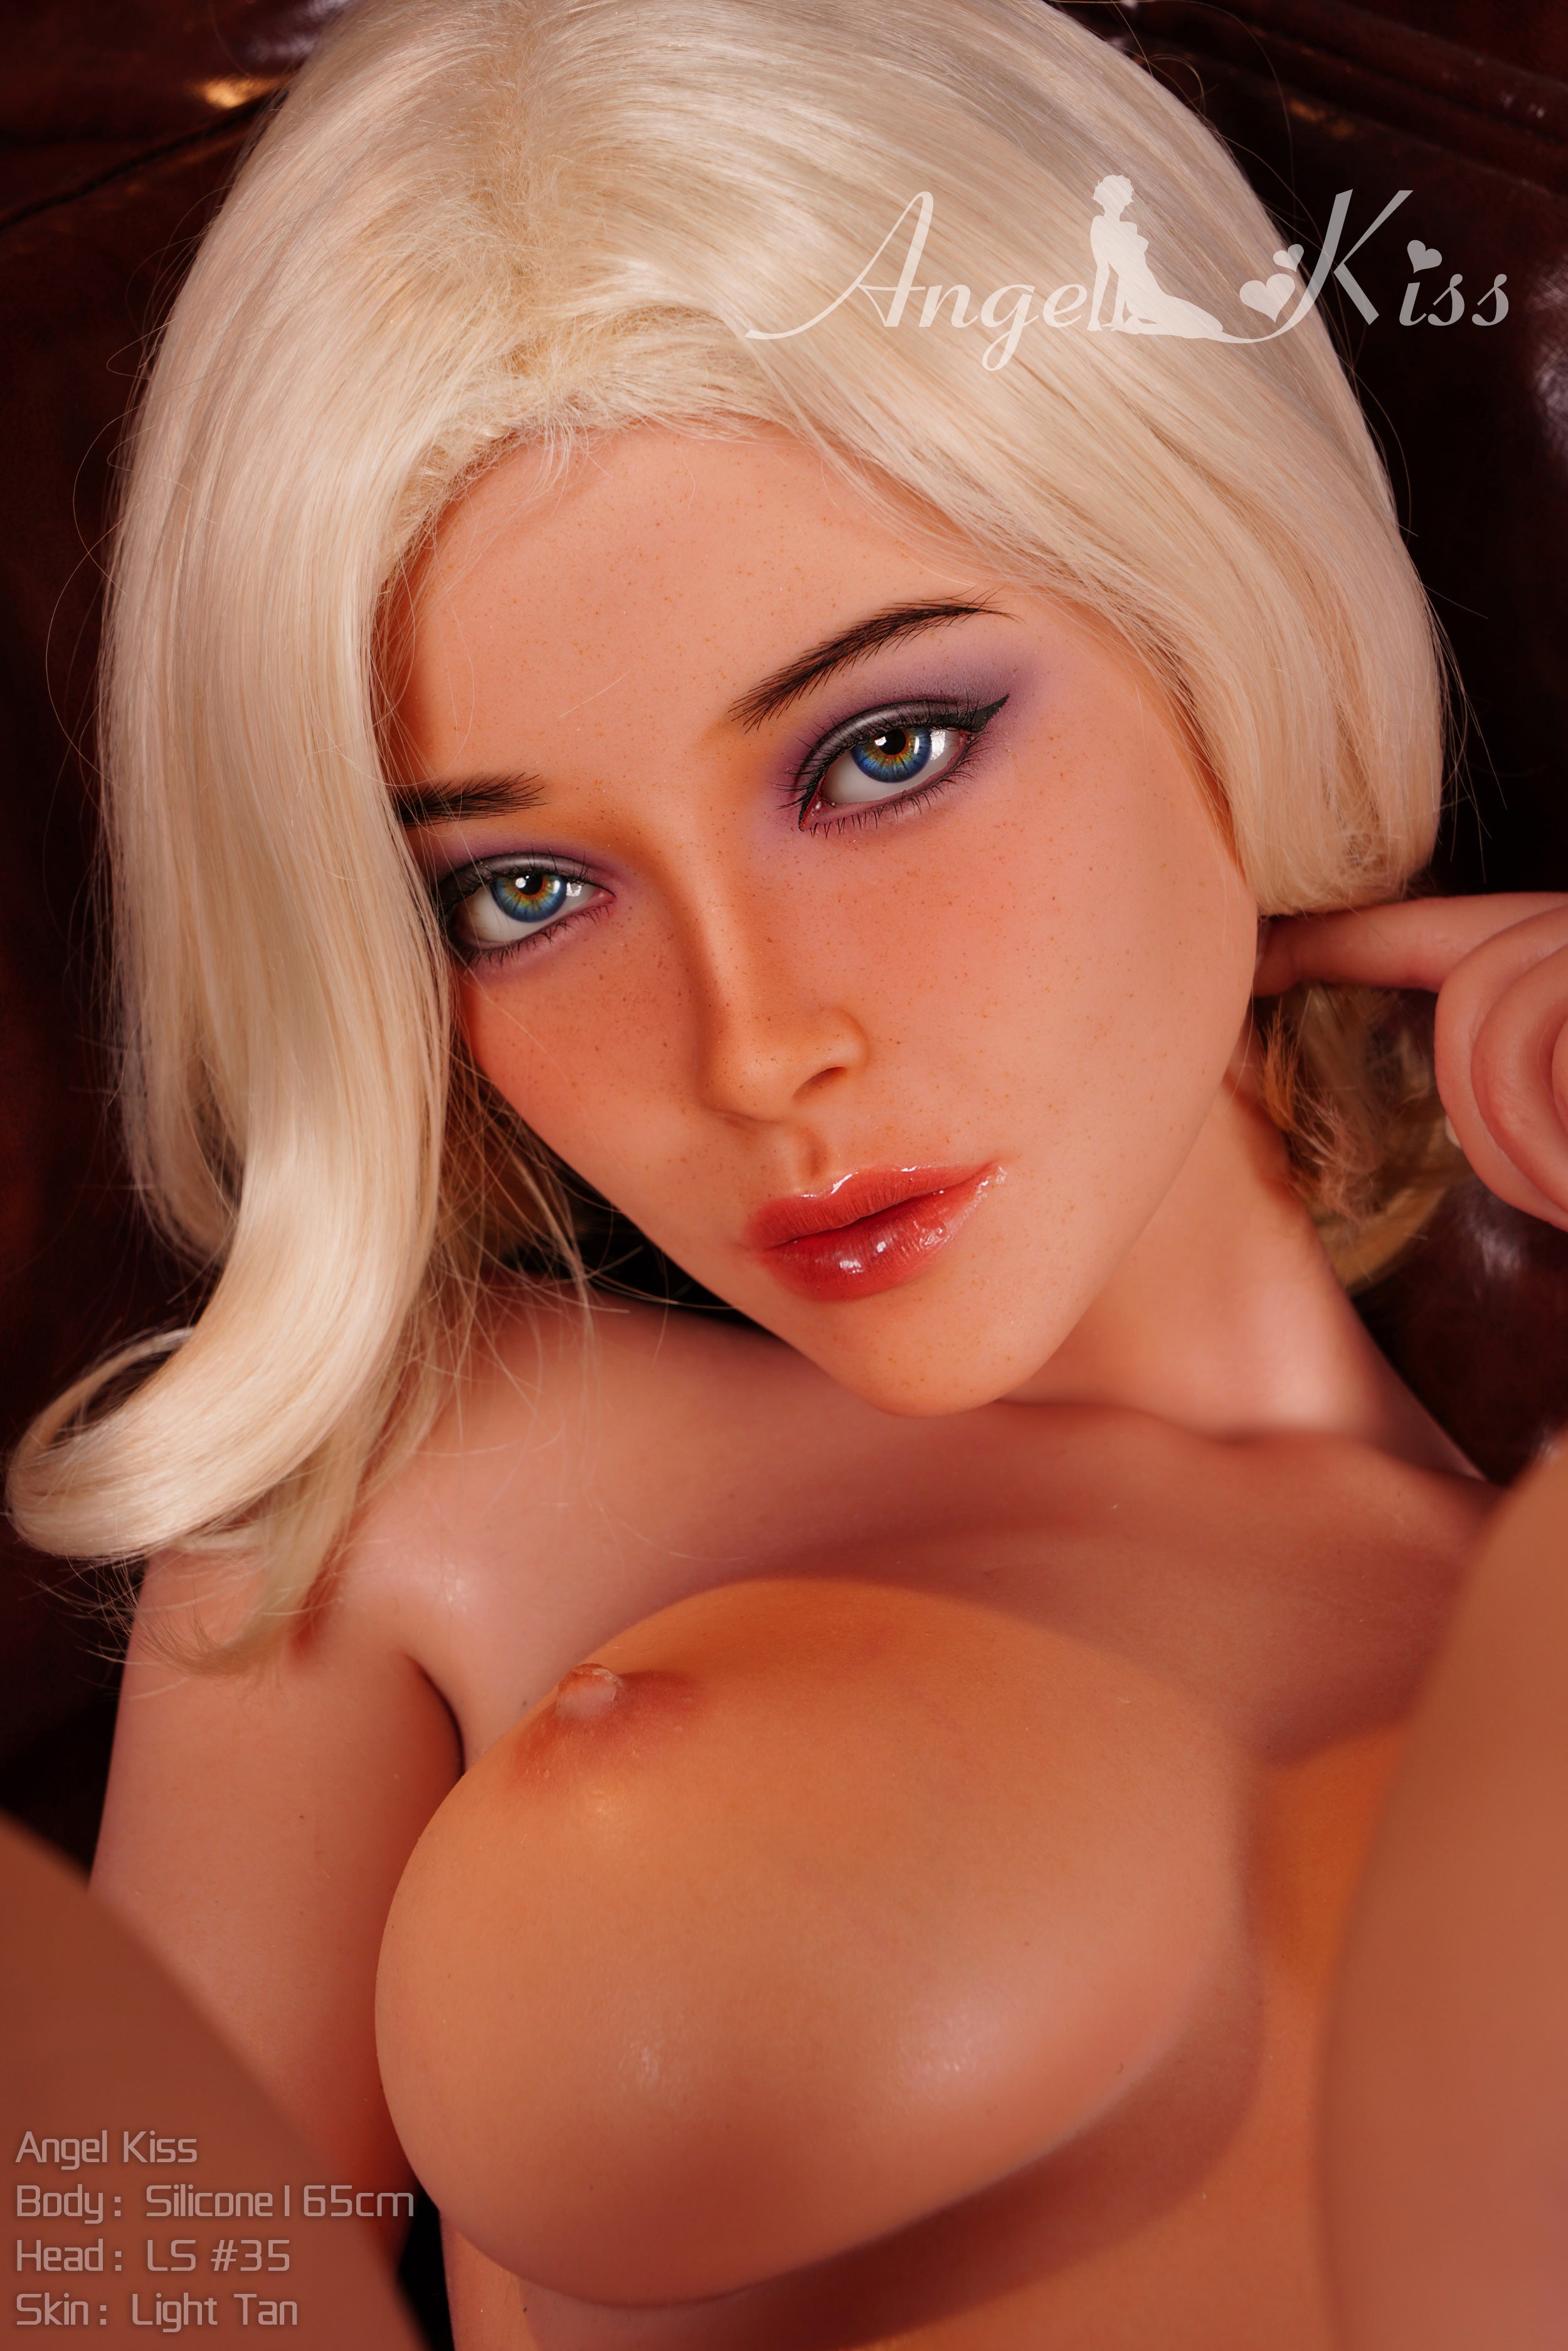 Angelkiss Doll 165 cm Silicone - Noemi | Buy Sex Dolls at DOLLS ACTUALLY